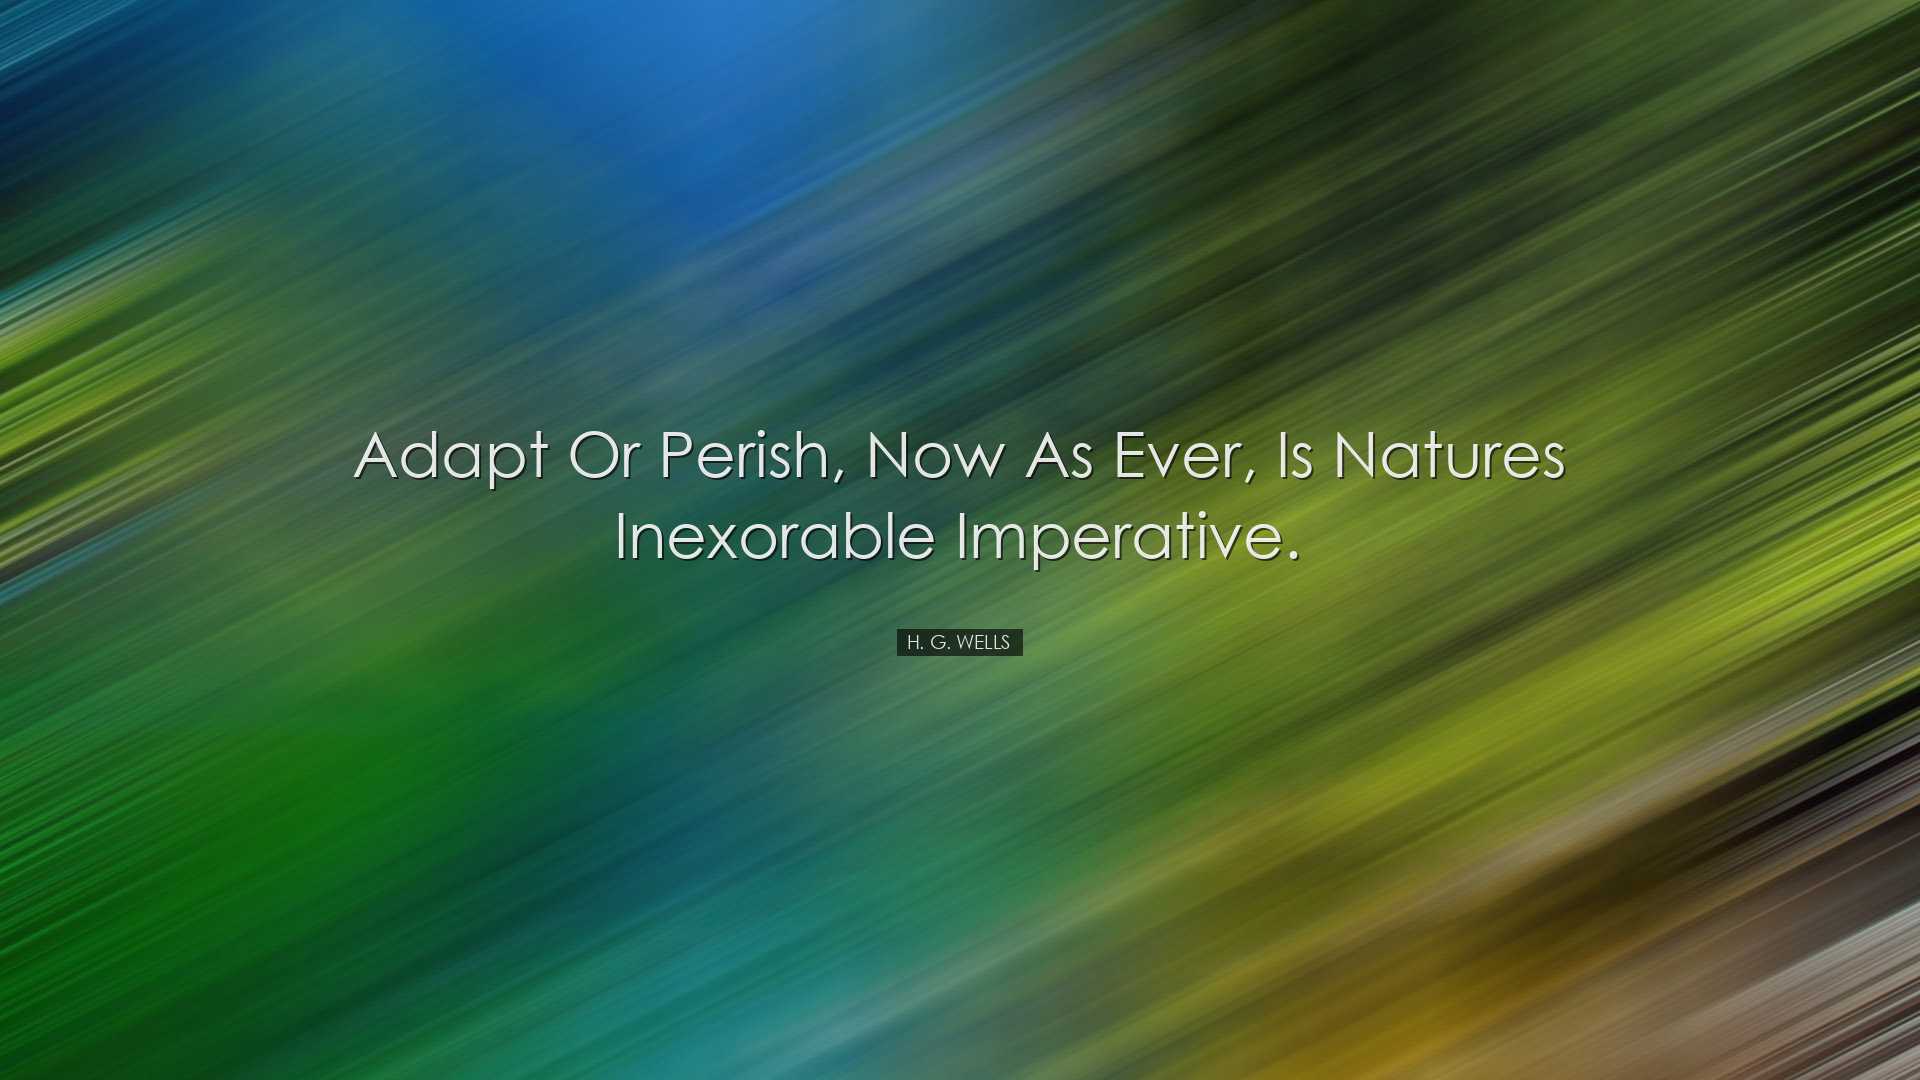 Adapt or perish, now as ever, is natures inexorable imperative. -